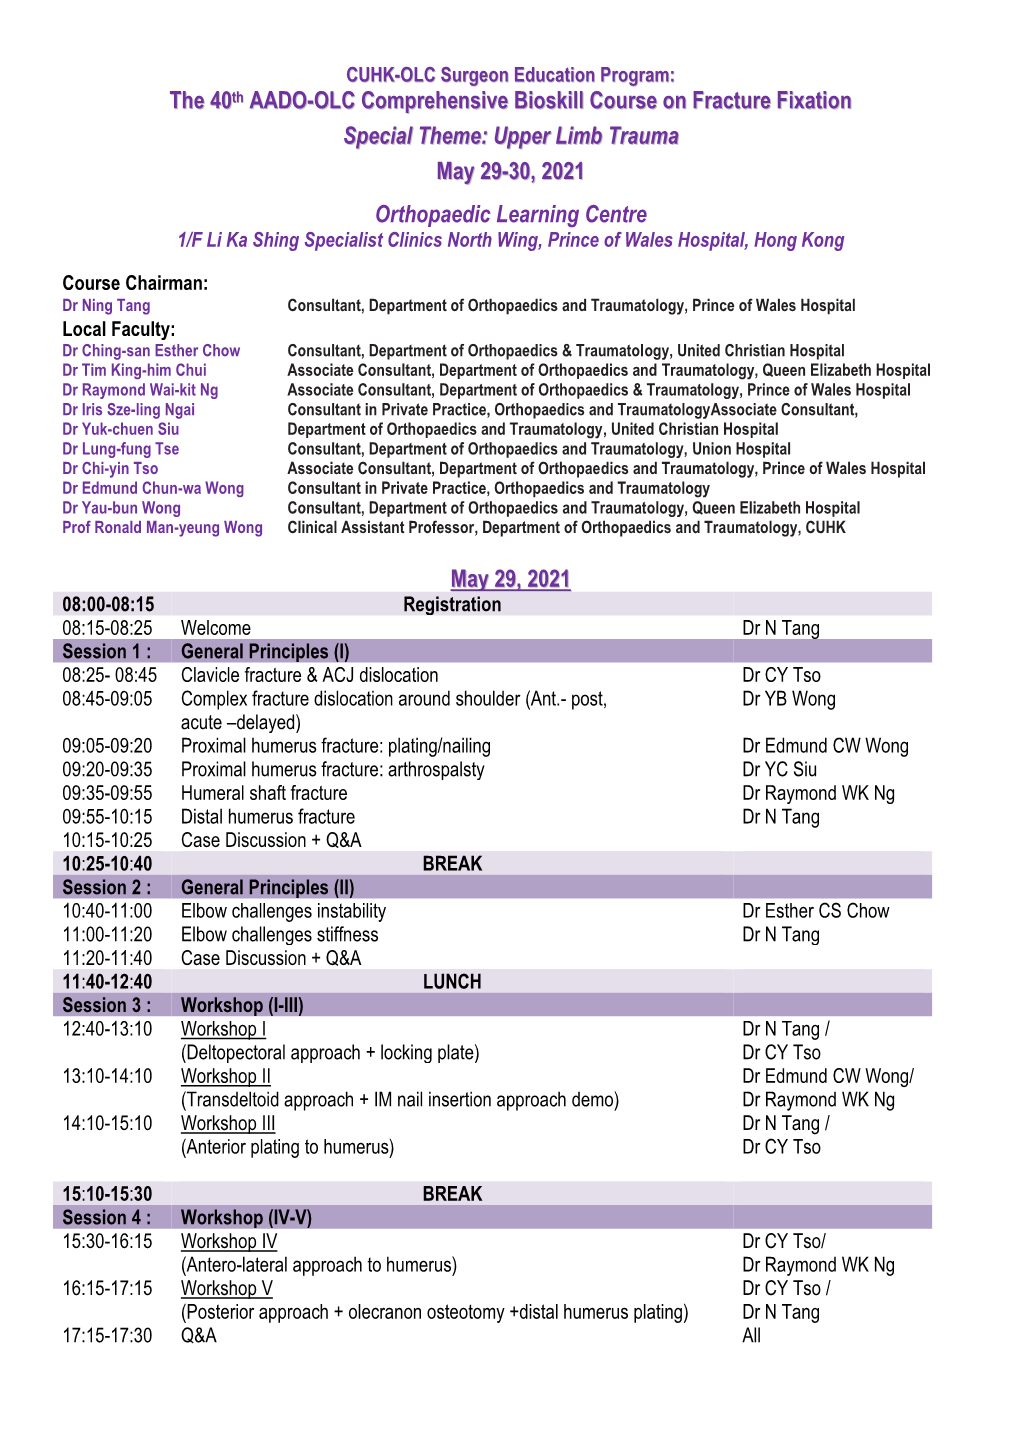 CUHK-OLC Surgeon Education Program: the 40Th AADO-OLC Comprehensive Bioskill Course on Fracture Fixation